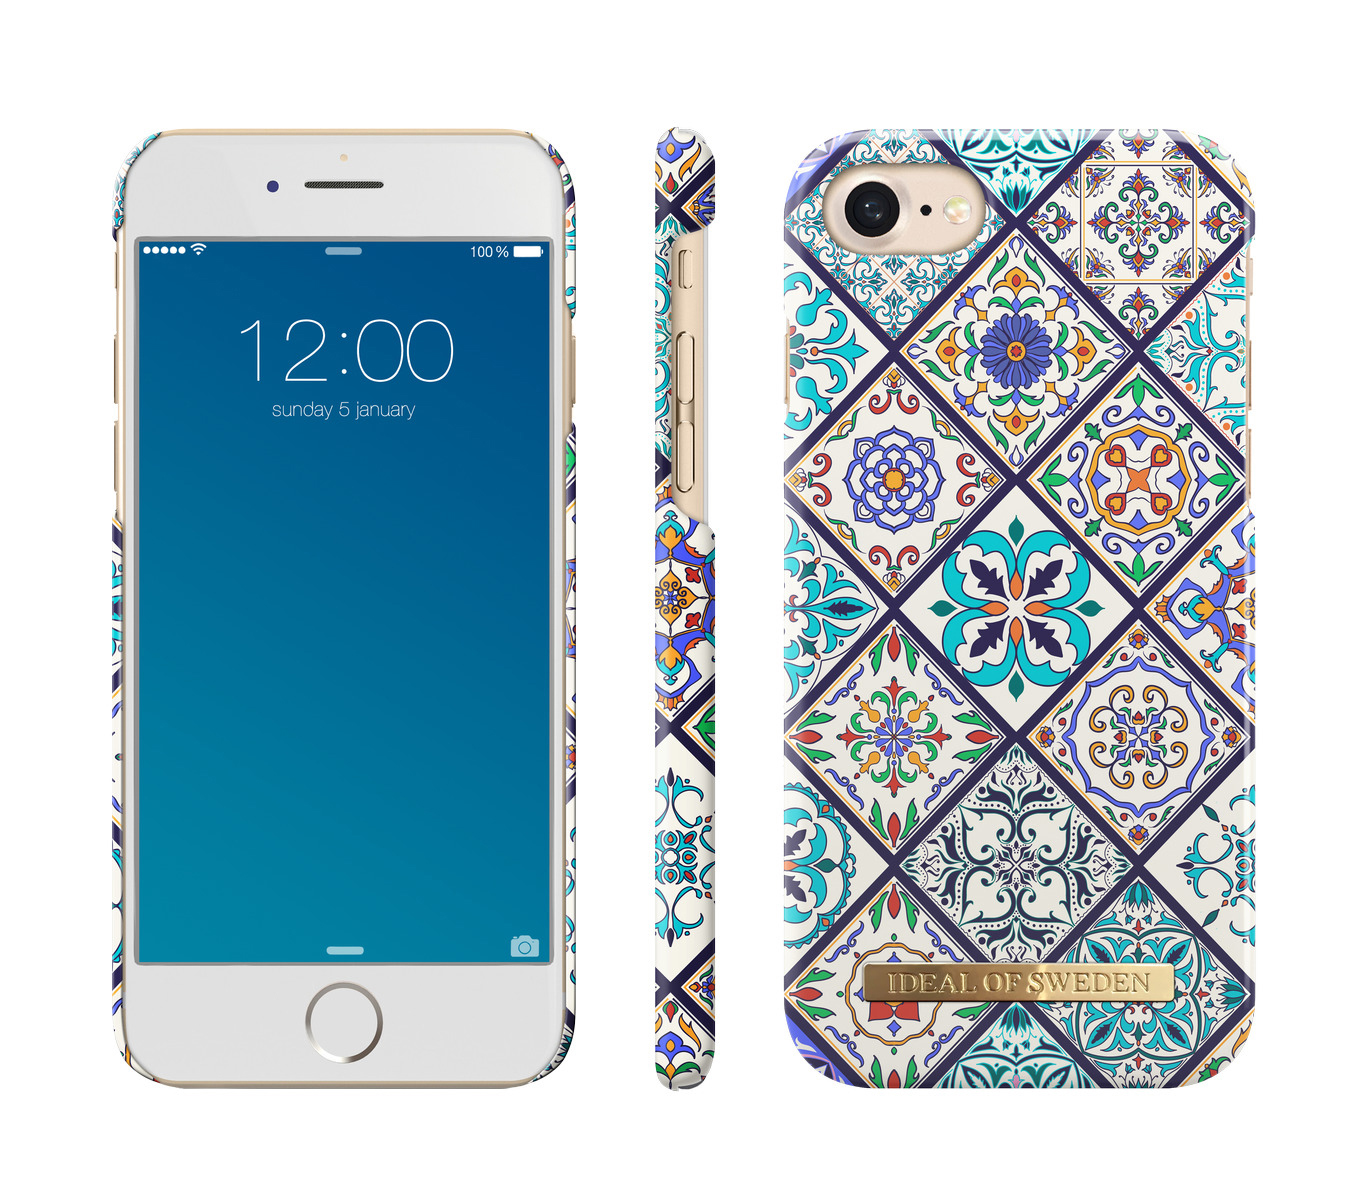 Fashion, iPhone 6, Mosaic 8, IDEAL Apple, Backcover, SWEDEN iPhone 7, OF iPhone